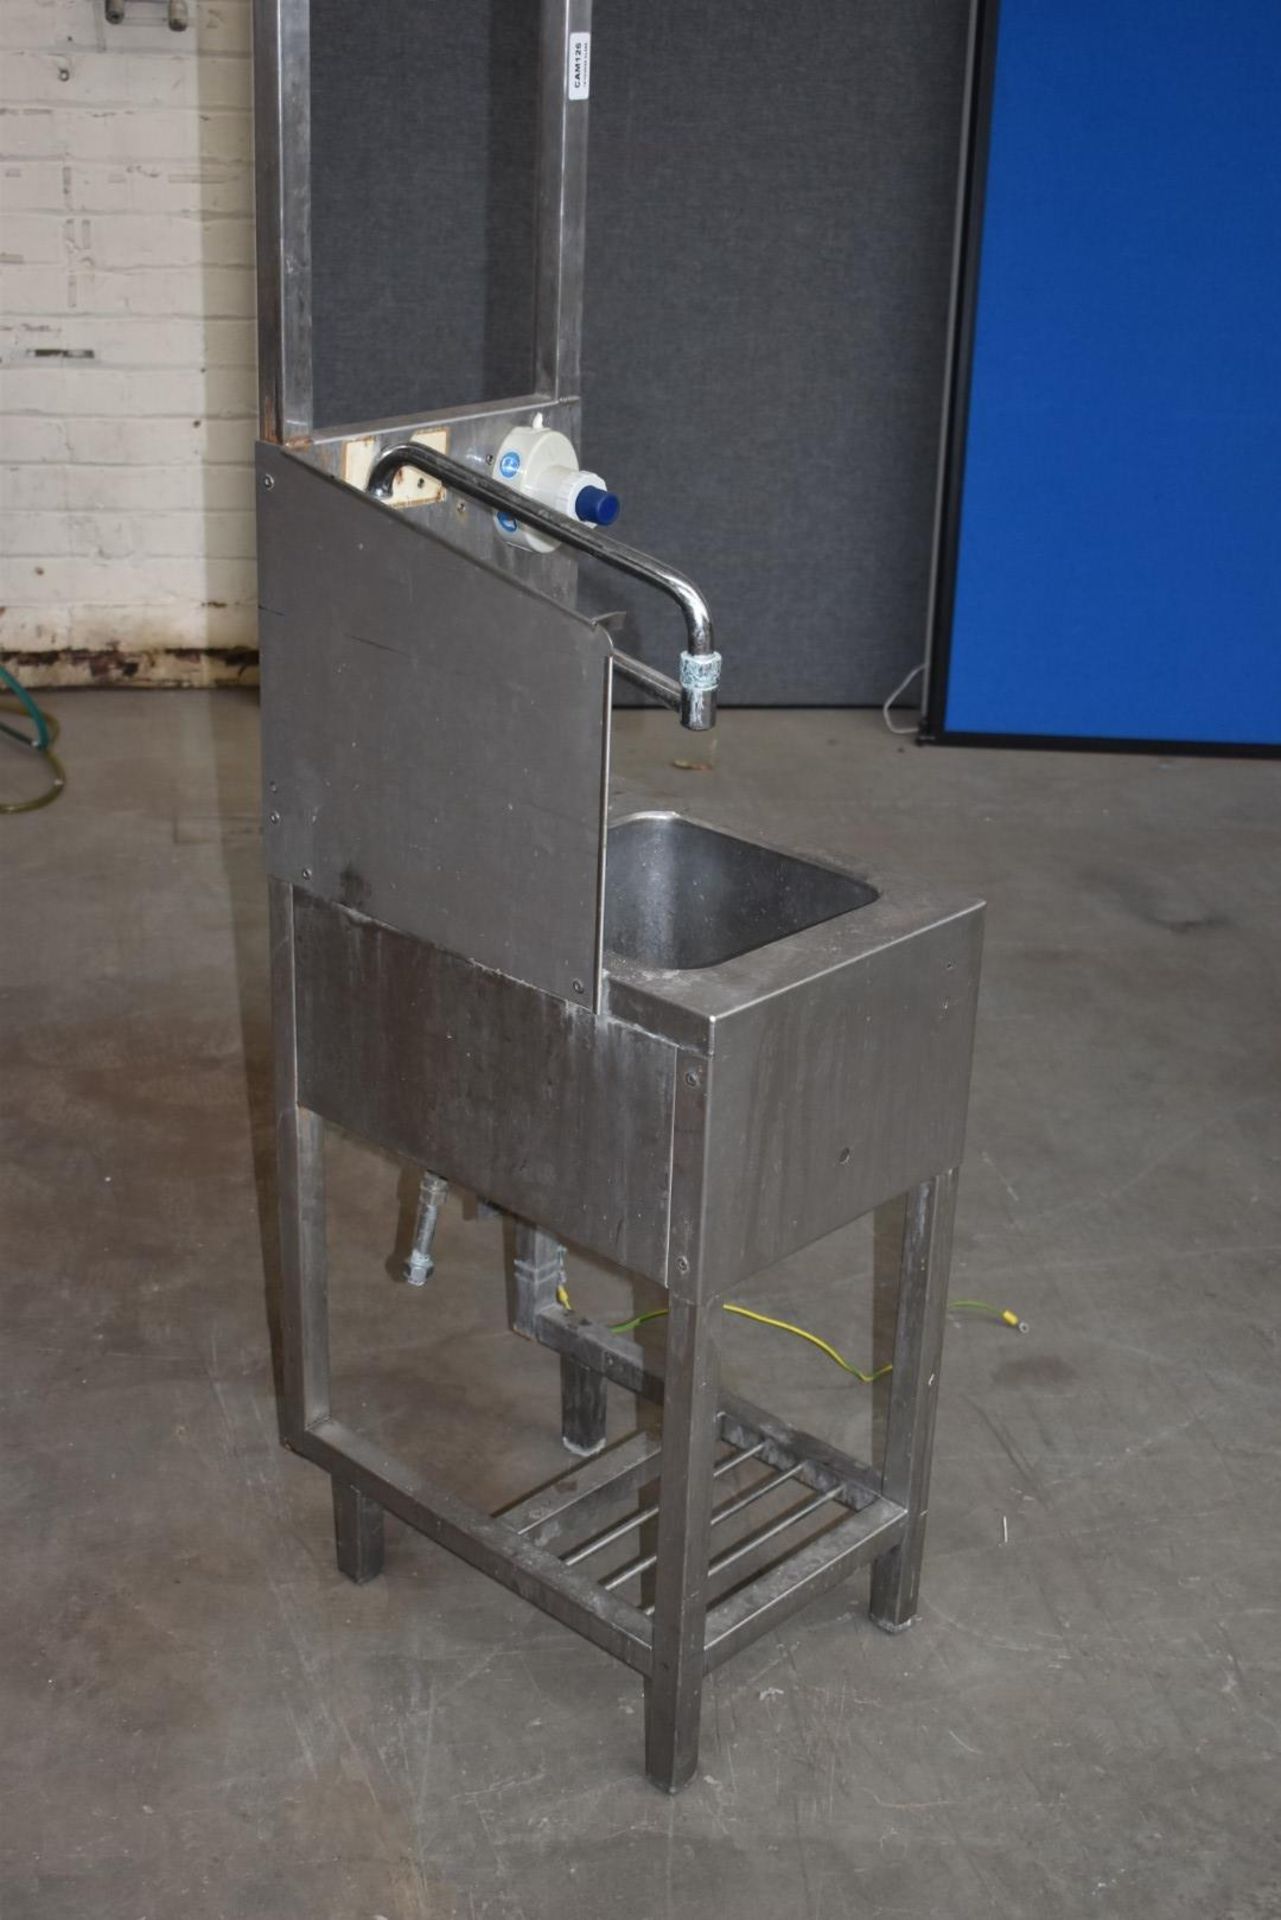 1 x Slim Janitorial Cleaning Wash Station - Features Wash Bowl, Integral Mop Hanger, Top Shelf - Image 3 of 5